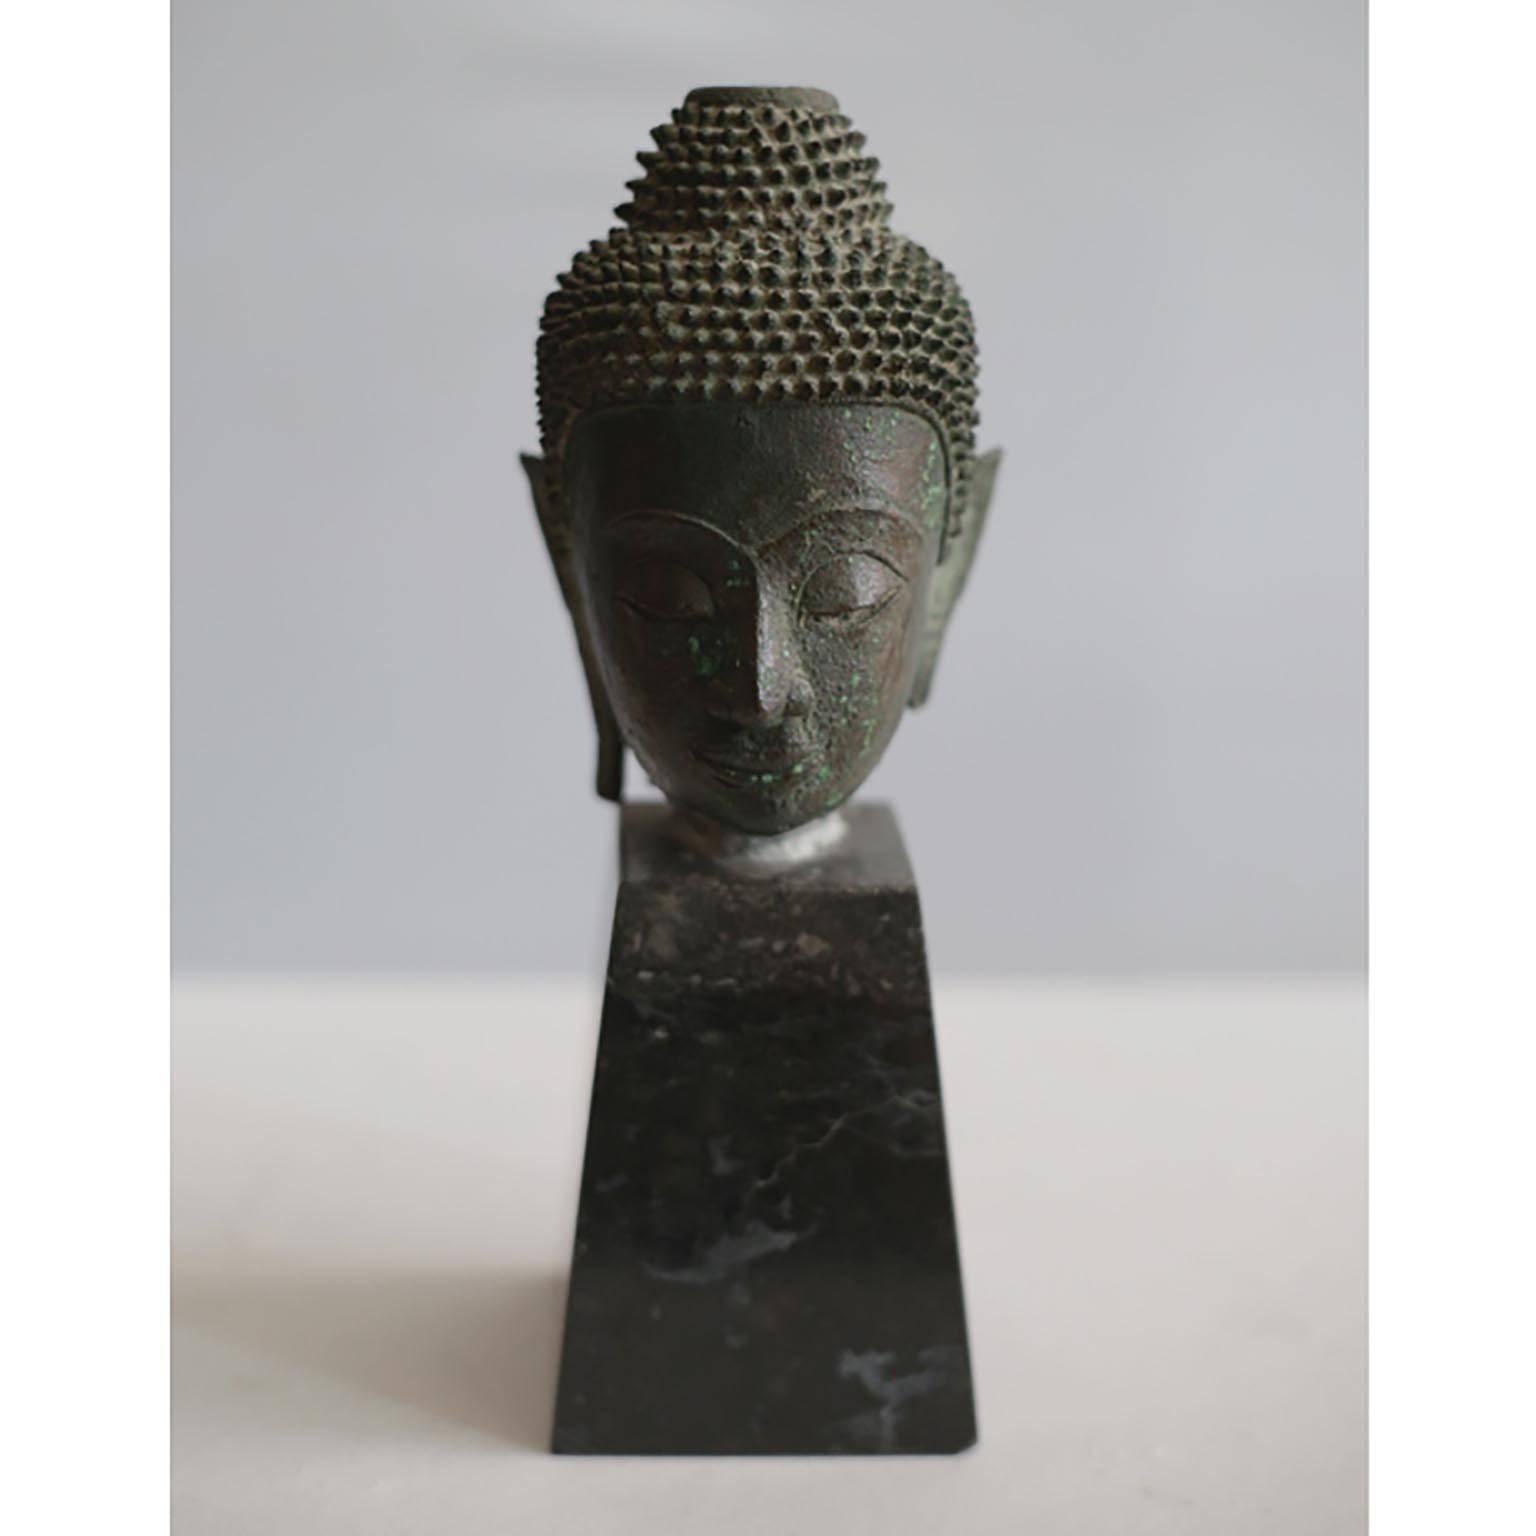 ABOUT

This is an original lost-wax casting bronze head of Buddah Shakyamuni from the 19th century, Thailand. It is mounted on a contemporary marble base and wood base. His meditative expression, arched eyebrows, downcast eyes, smiling lips,